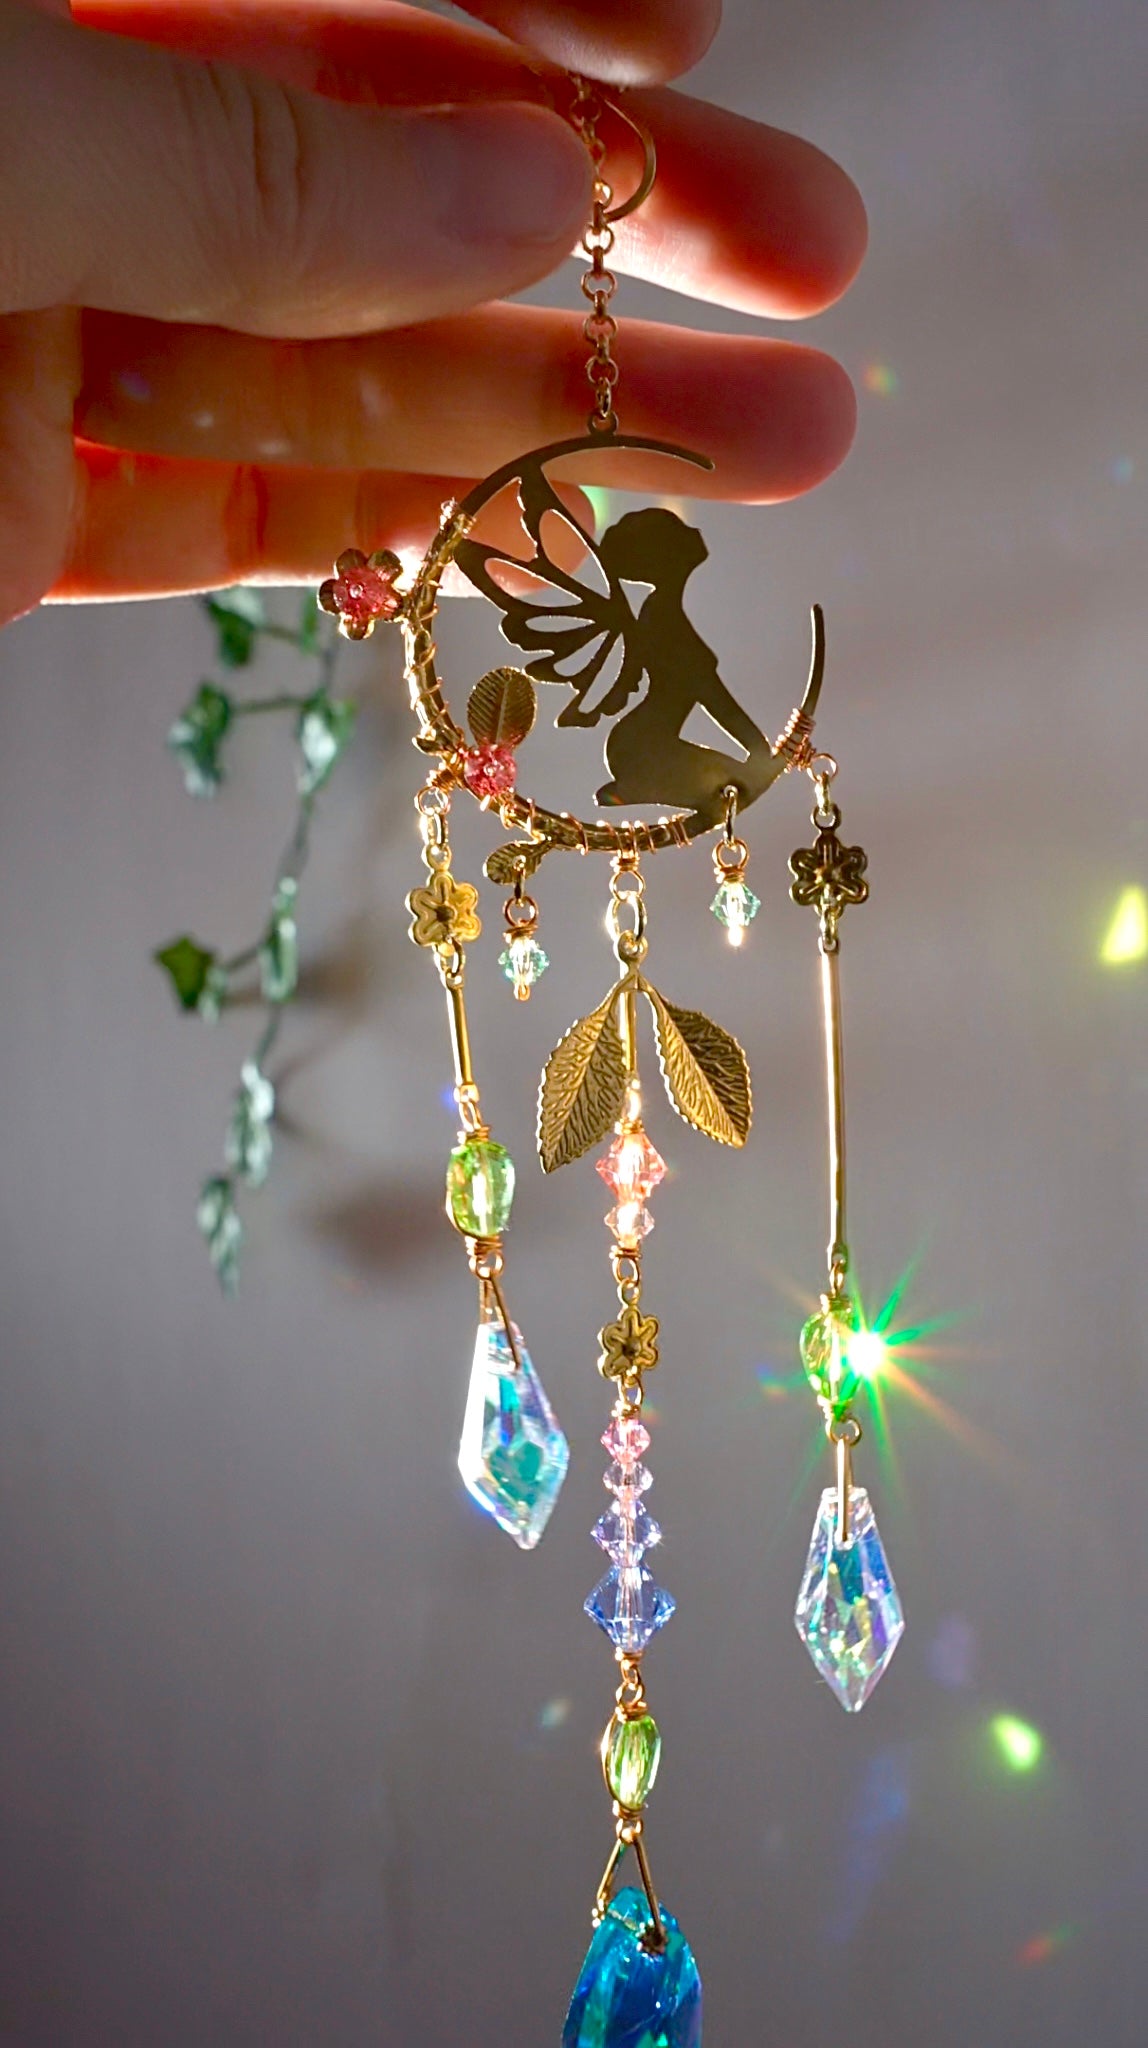 "Fairy Flora" Car Charm~ Fae with Flowers and Crescent Moon, ombré pastel crystal prism Rear View Mirror hanger accessories